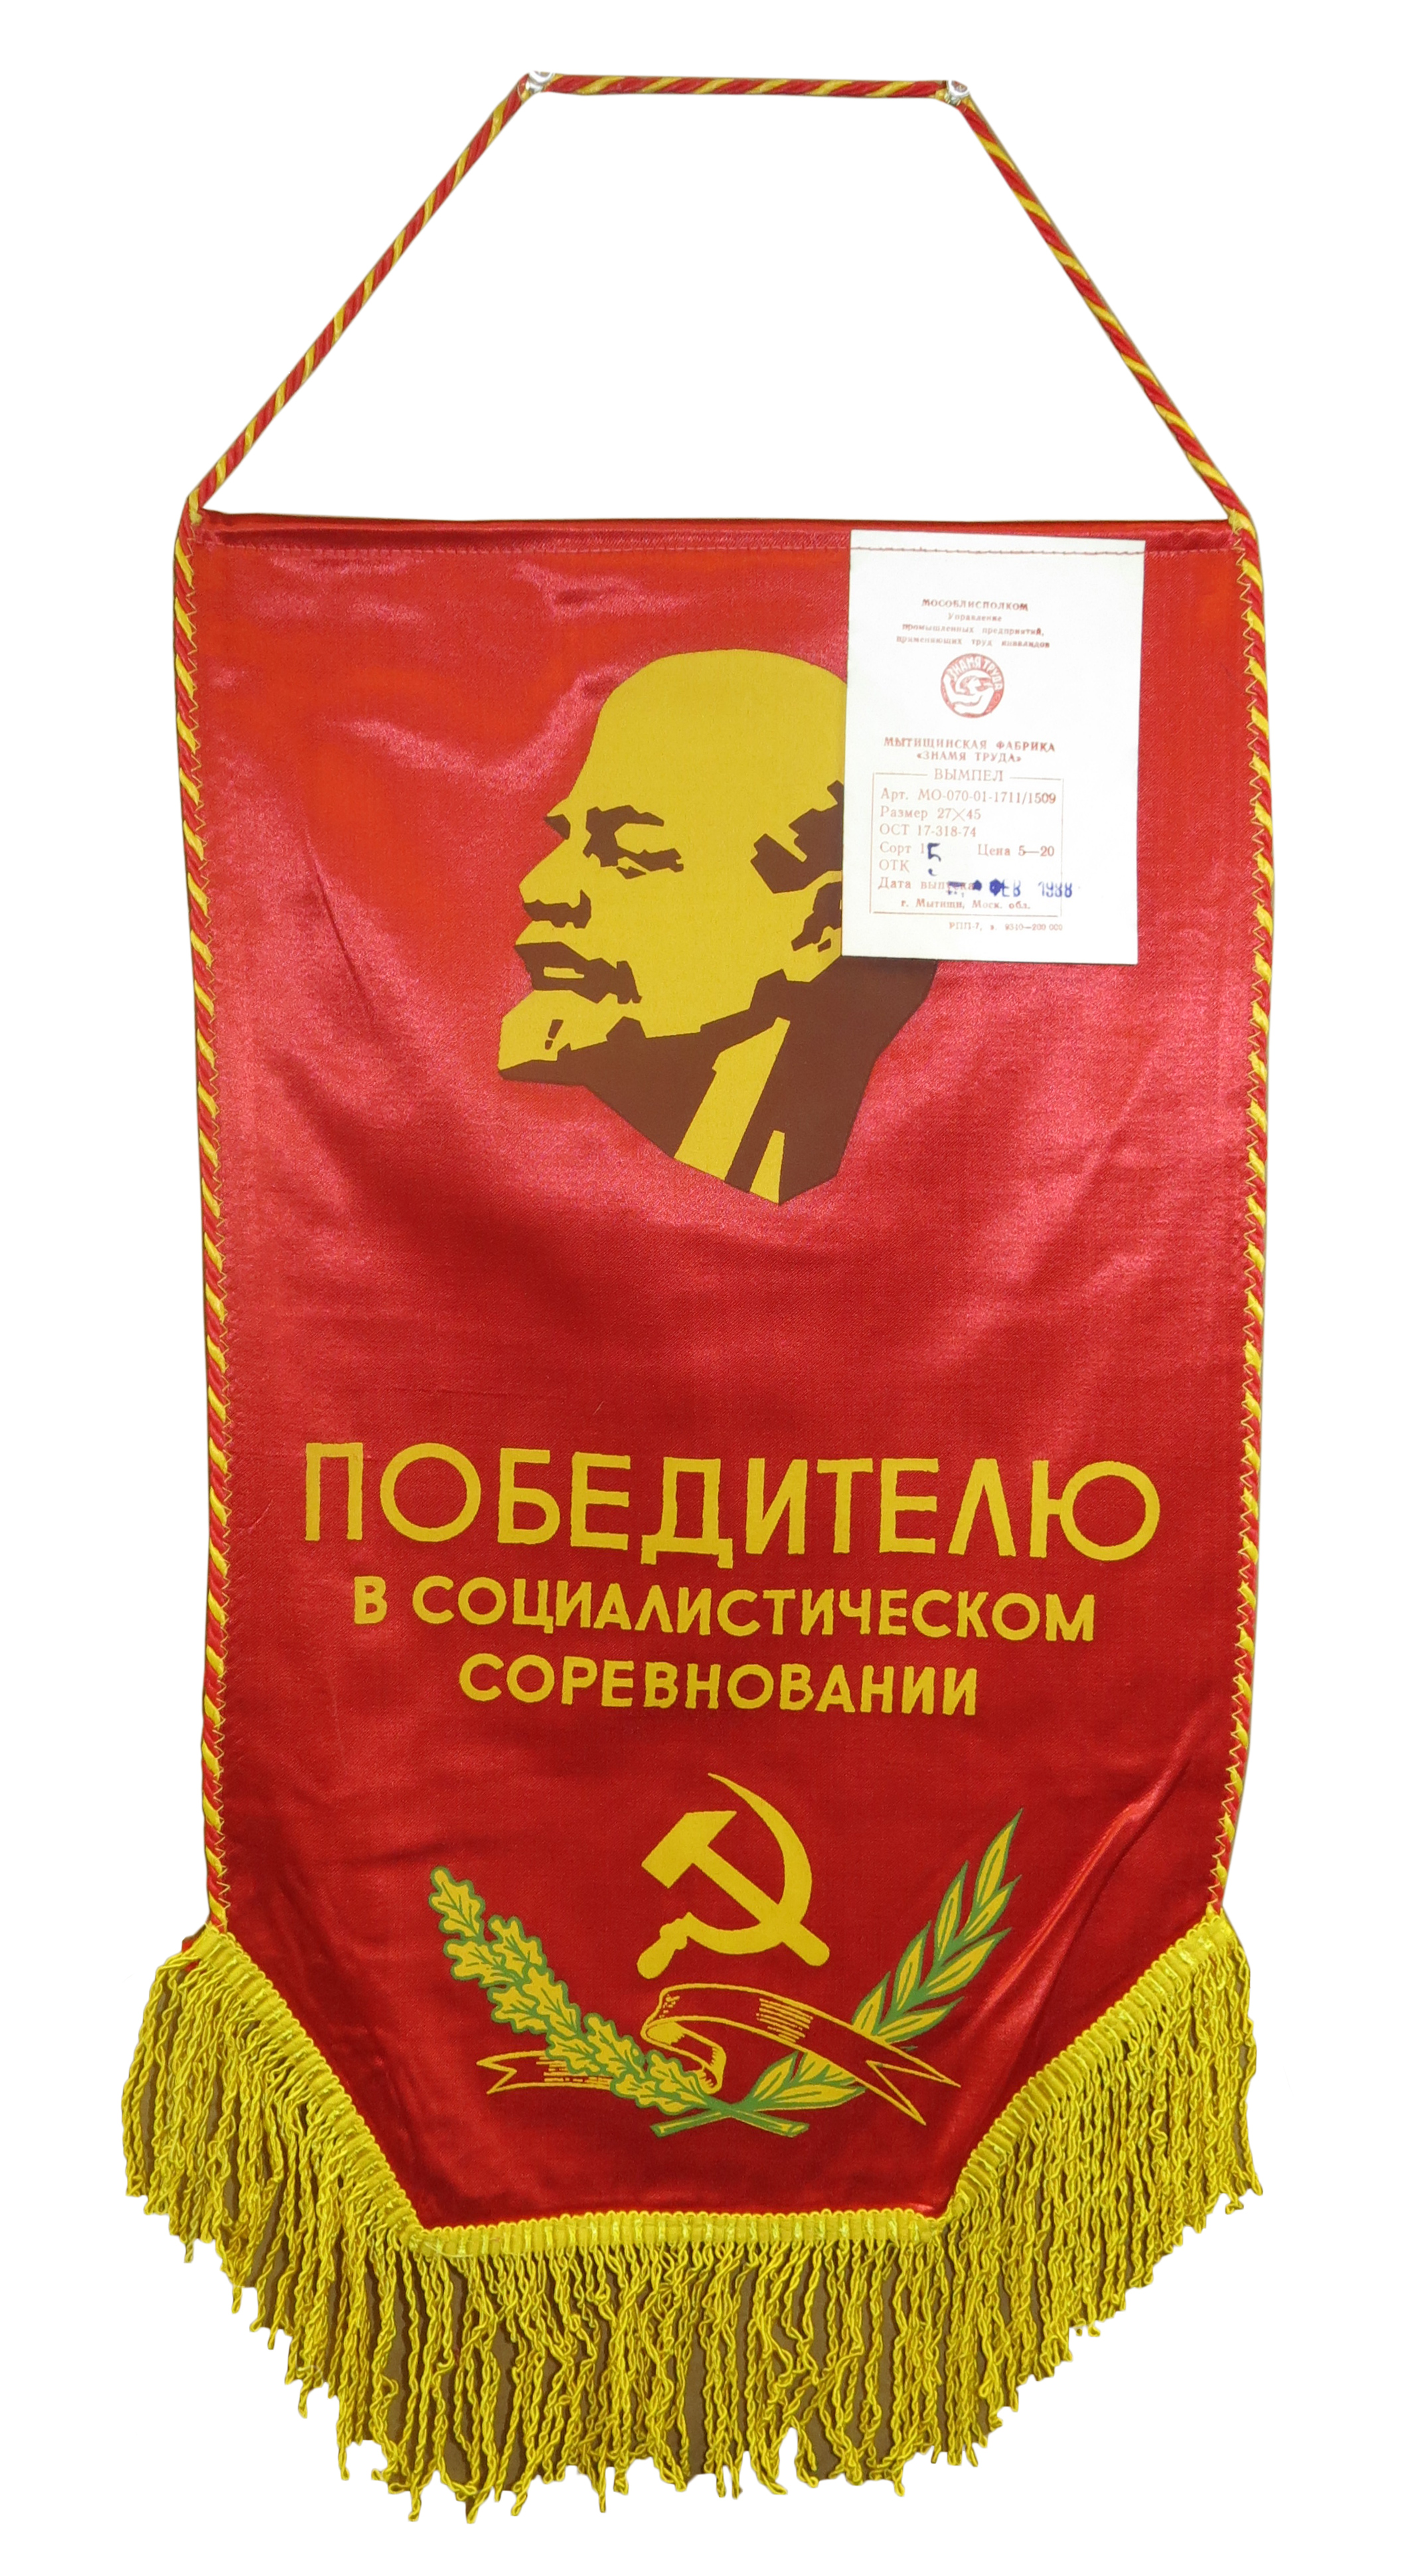 Soviet Union Pennant RED Flag Banner 35/60cm winner in the socialist competition 